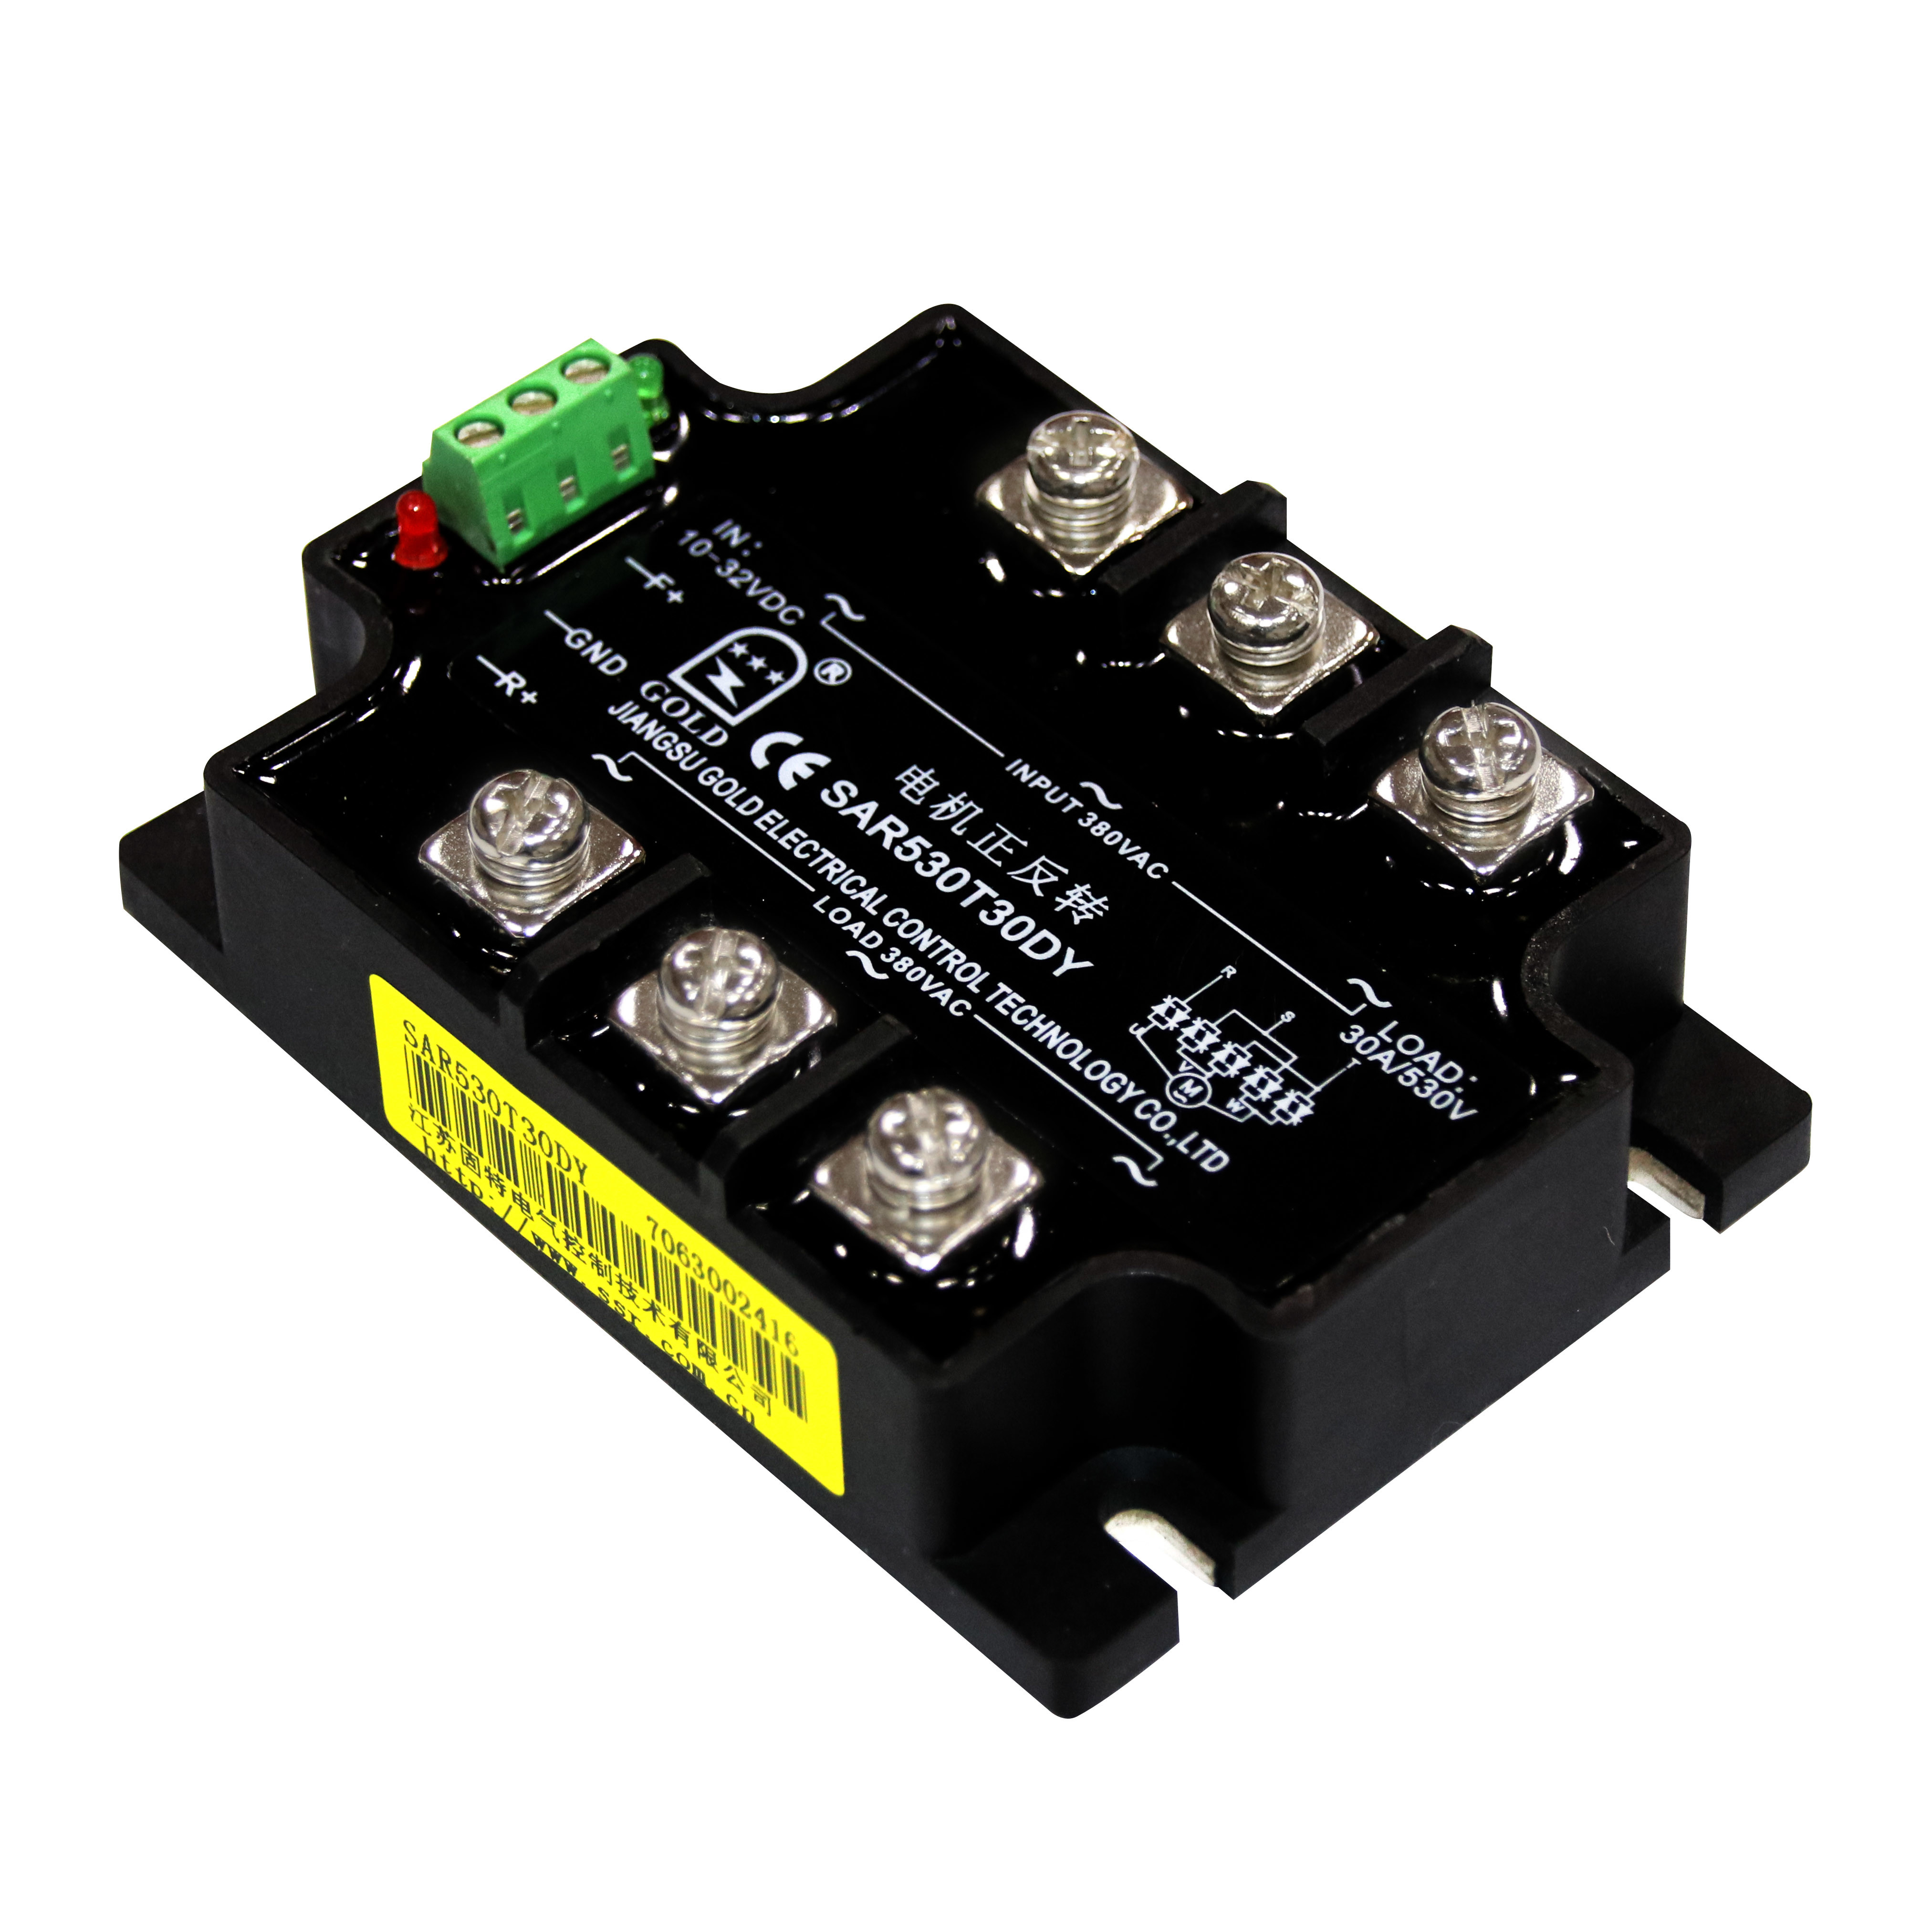 Buy cheap 1000w Ac Brushed Motor Speed Controller product